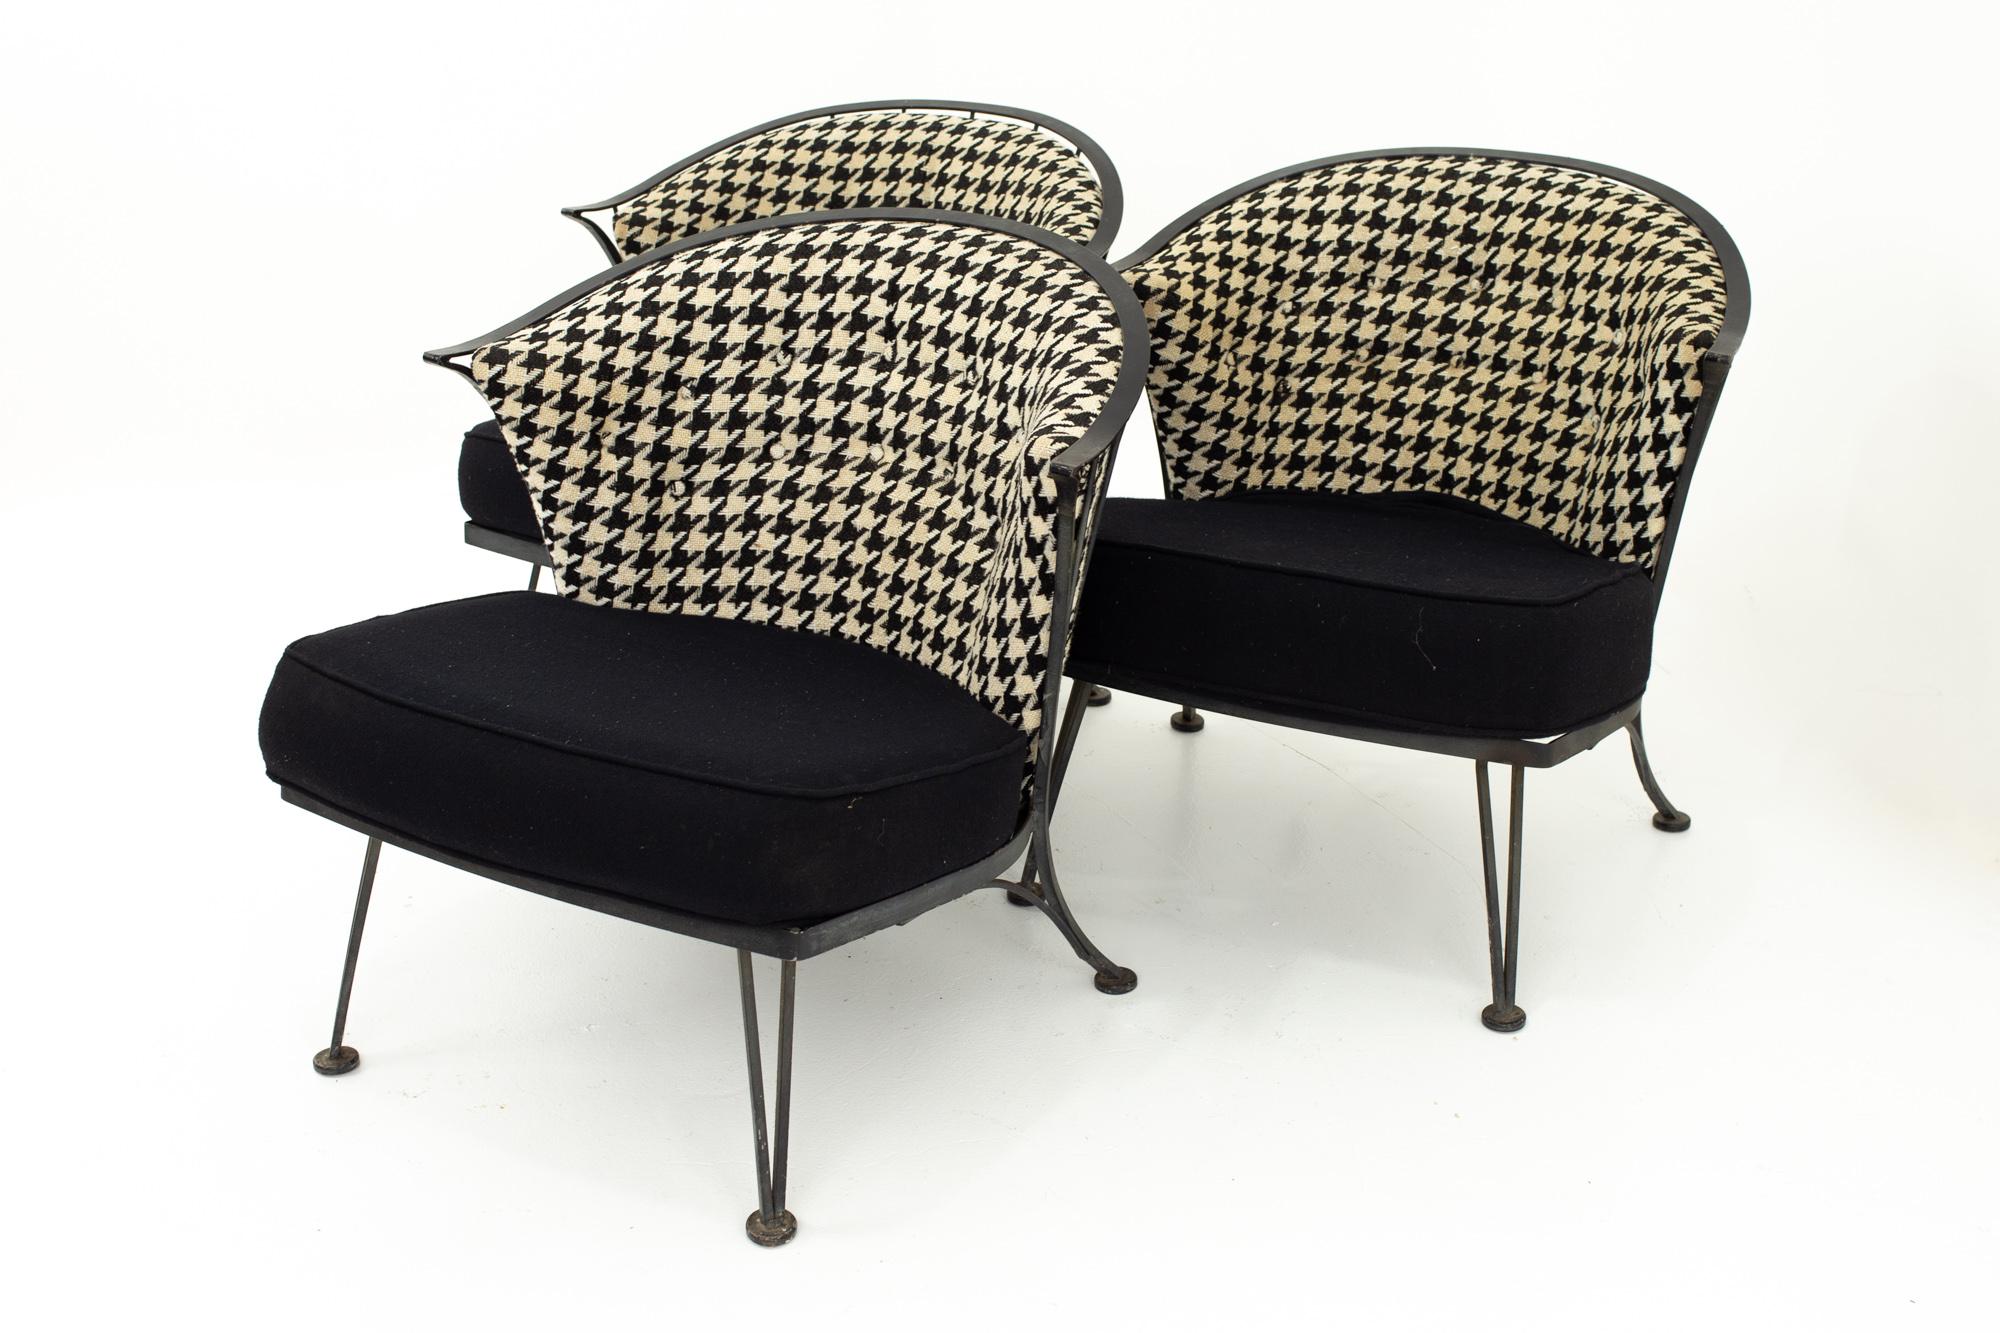 Salterini Mid Century outdoor wrought iron and black and white houndstooth patio chairs - set of 3
Each chair measures: 30 wide x 29 deep x 28 high with a seat height of 18 inches

This set is available in what we call restored vintage condition.